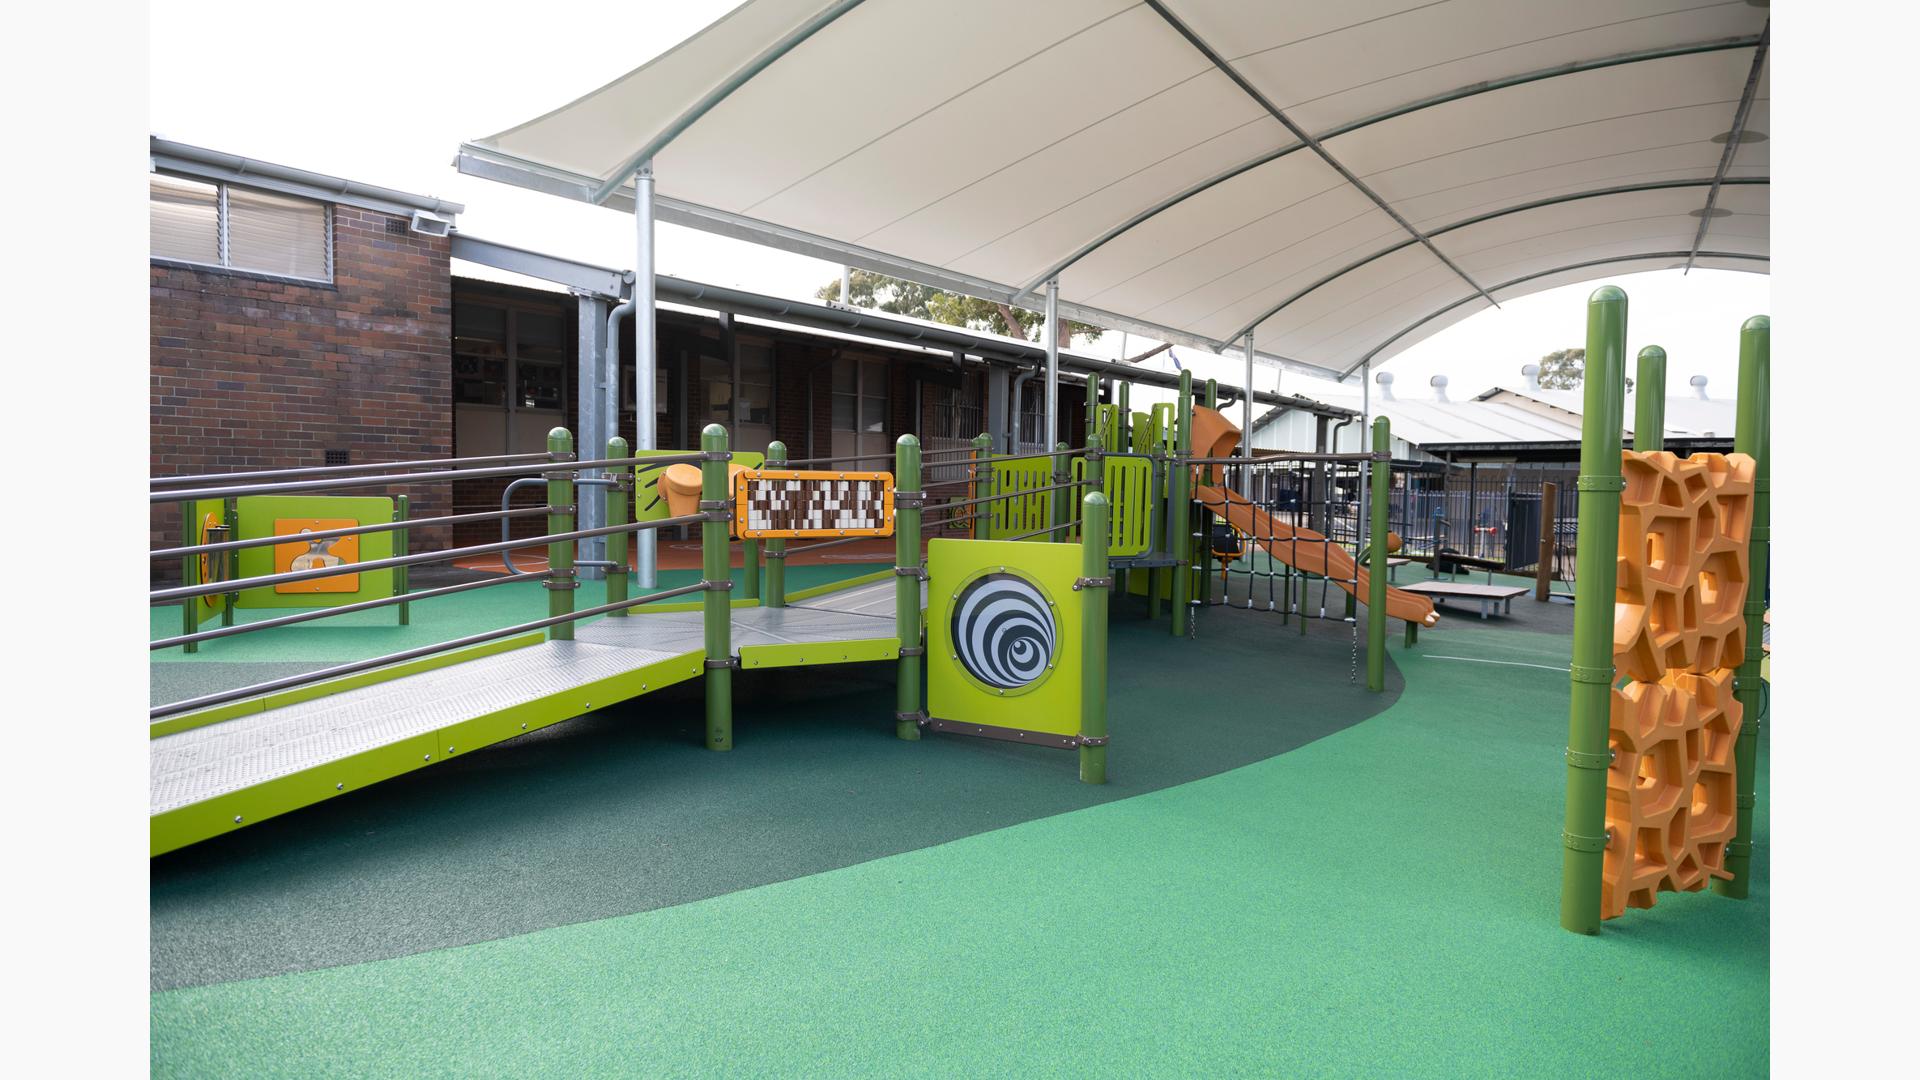 A play area with green safety surfacing with a play structure made up of accessible bridges and ramps leading to play panels, slides, and climbers. The play area is completely covered by a large arched shade next to a brick building. 